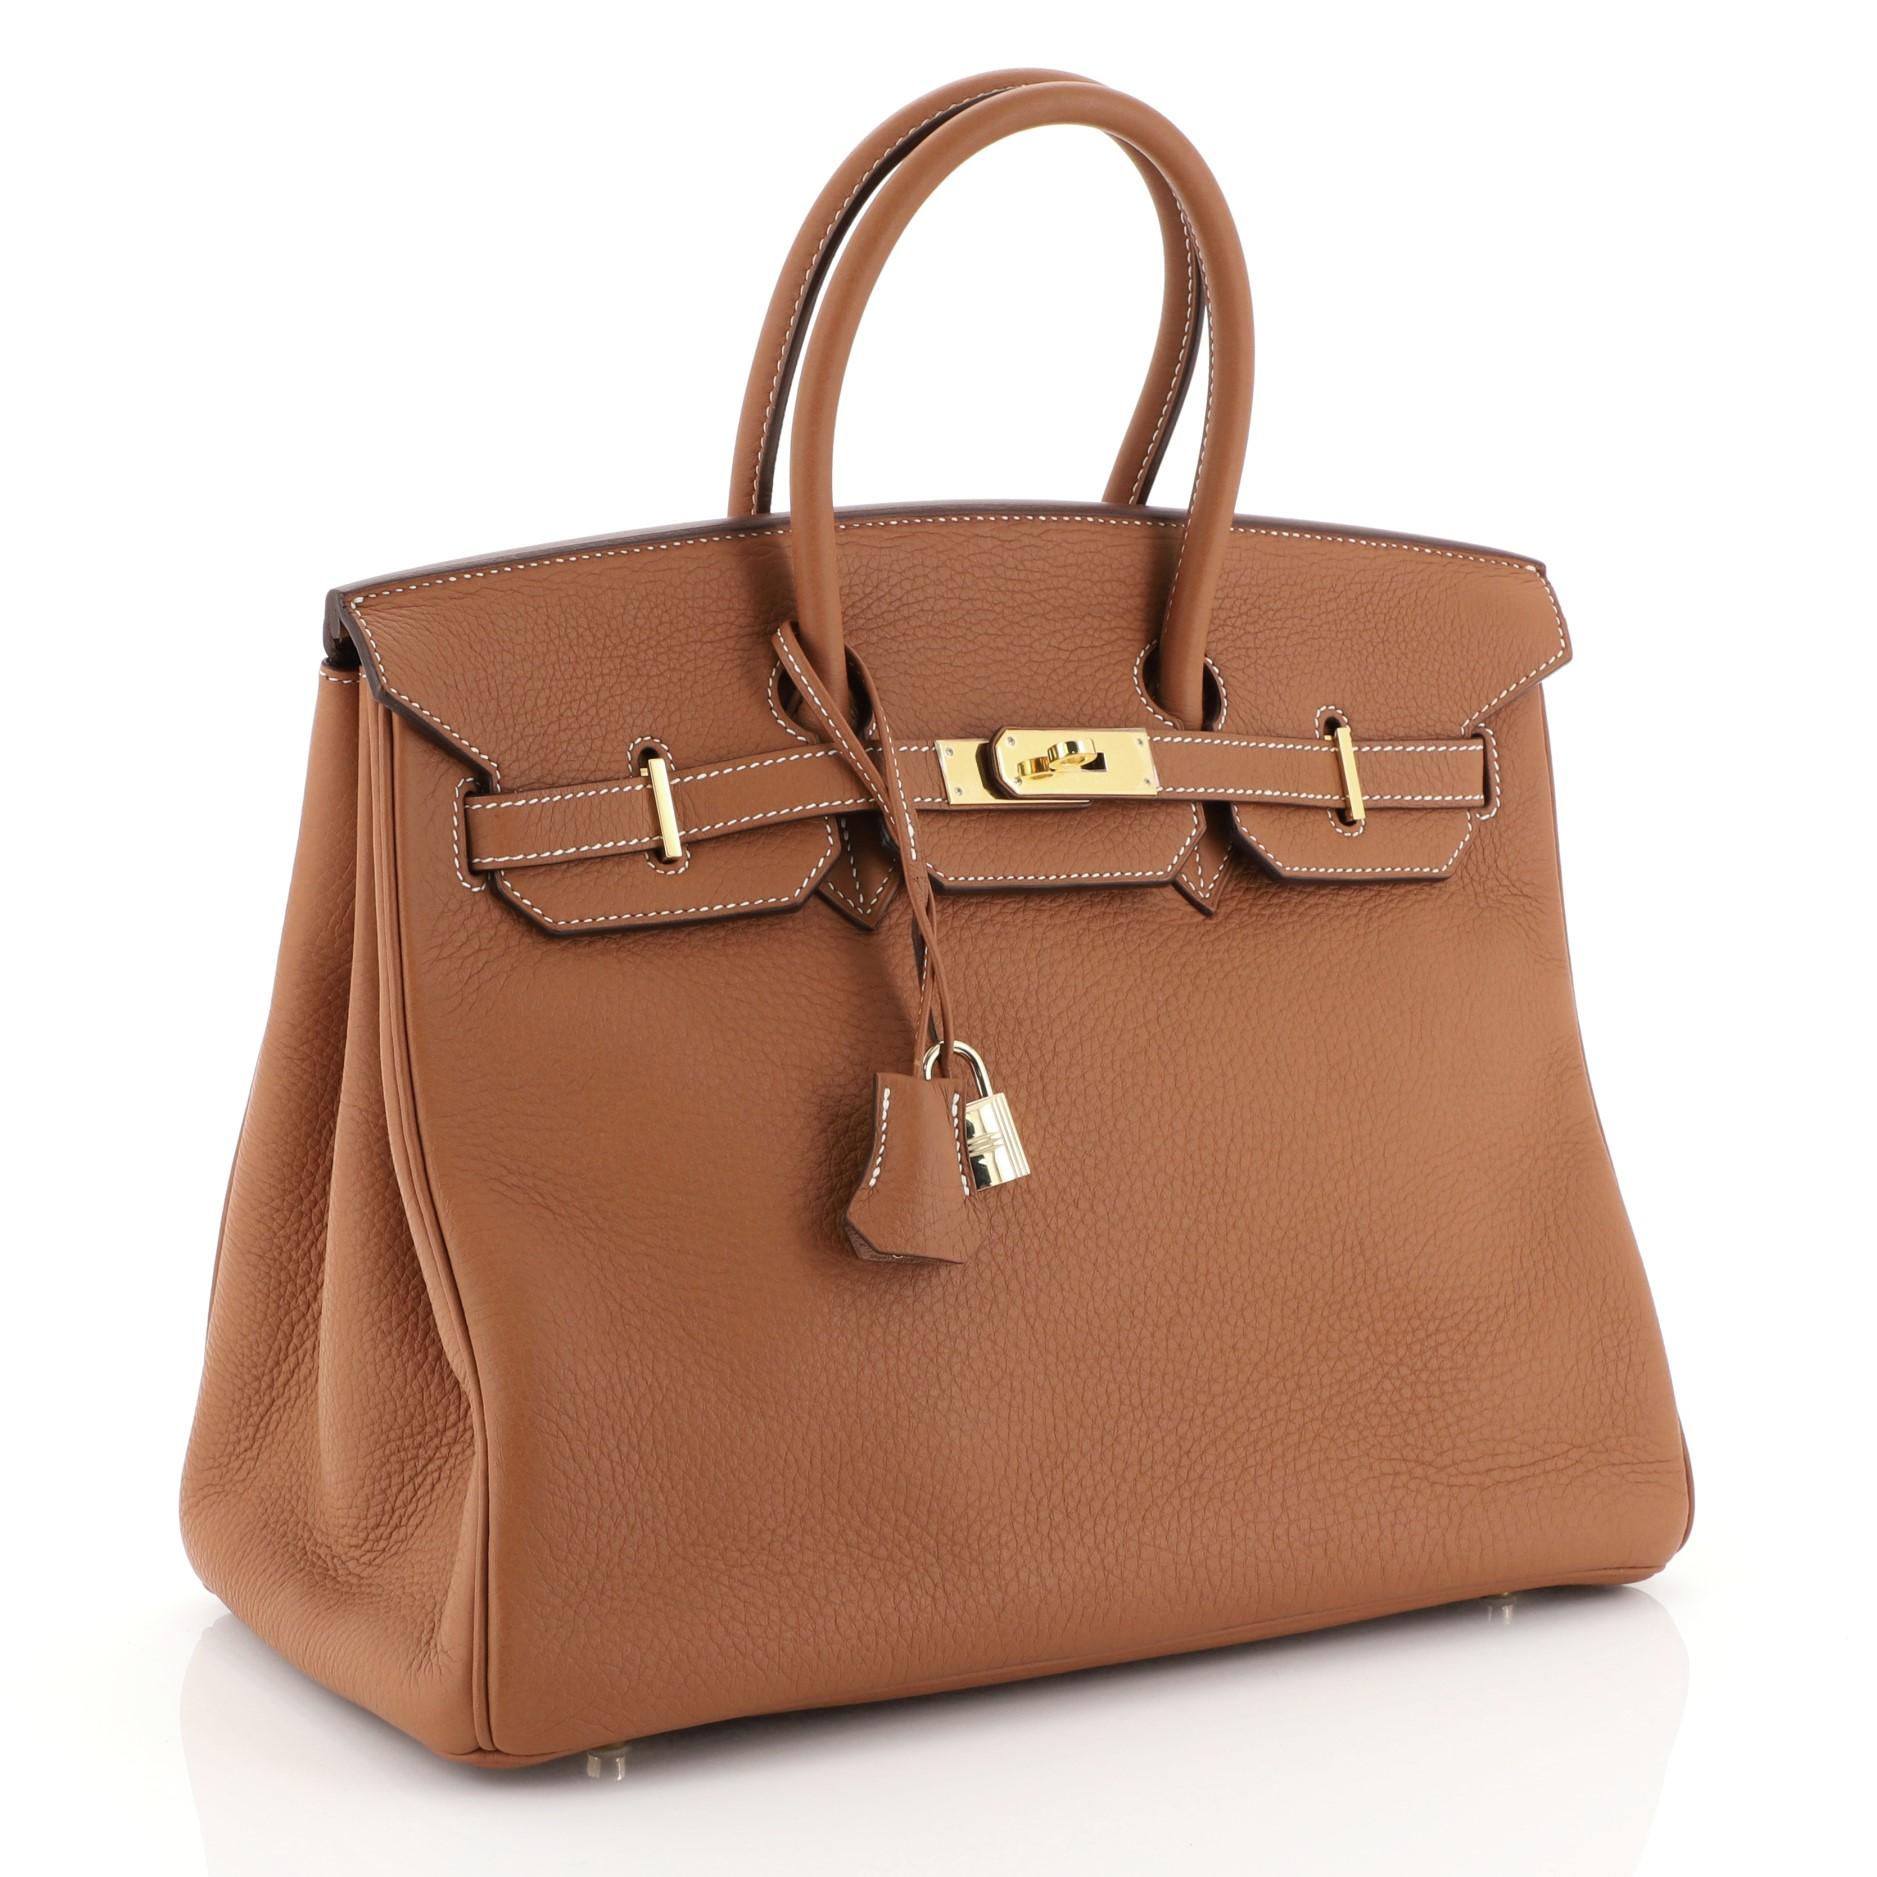 This Hermes Birkin Handbag Etrusque Clemence with Gold Hardware 35, crafted in Etrusque brown Clemence leather, features dual rolled handles, frontal flap, and gold hardware. Its turn-lock closure opens to an Etrusque brown Chevre leather interior